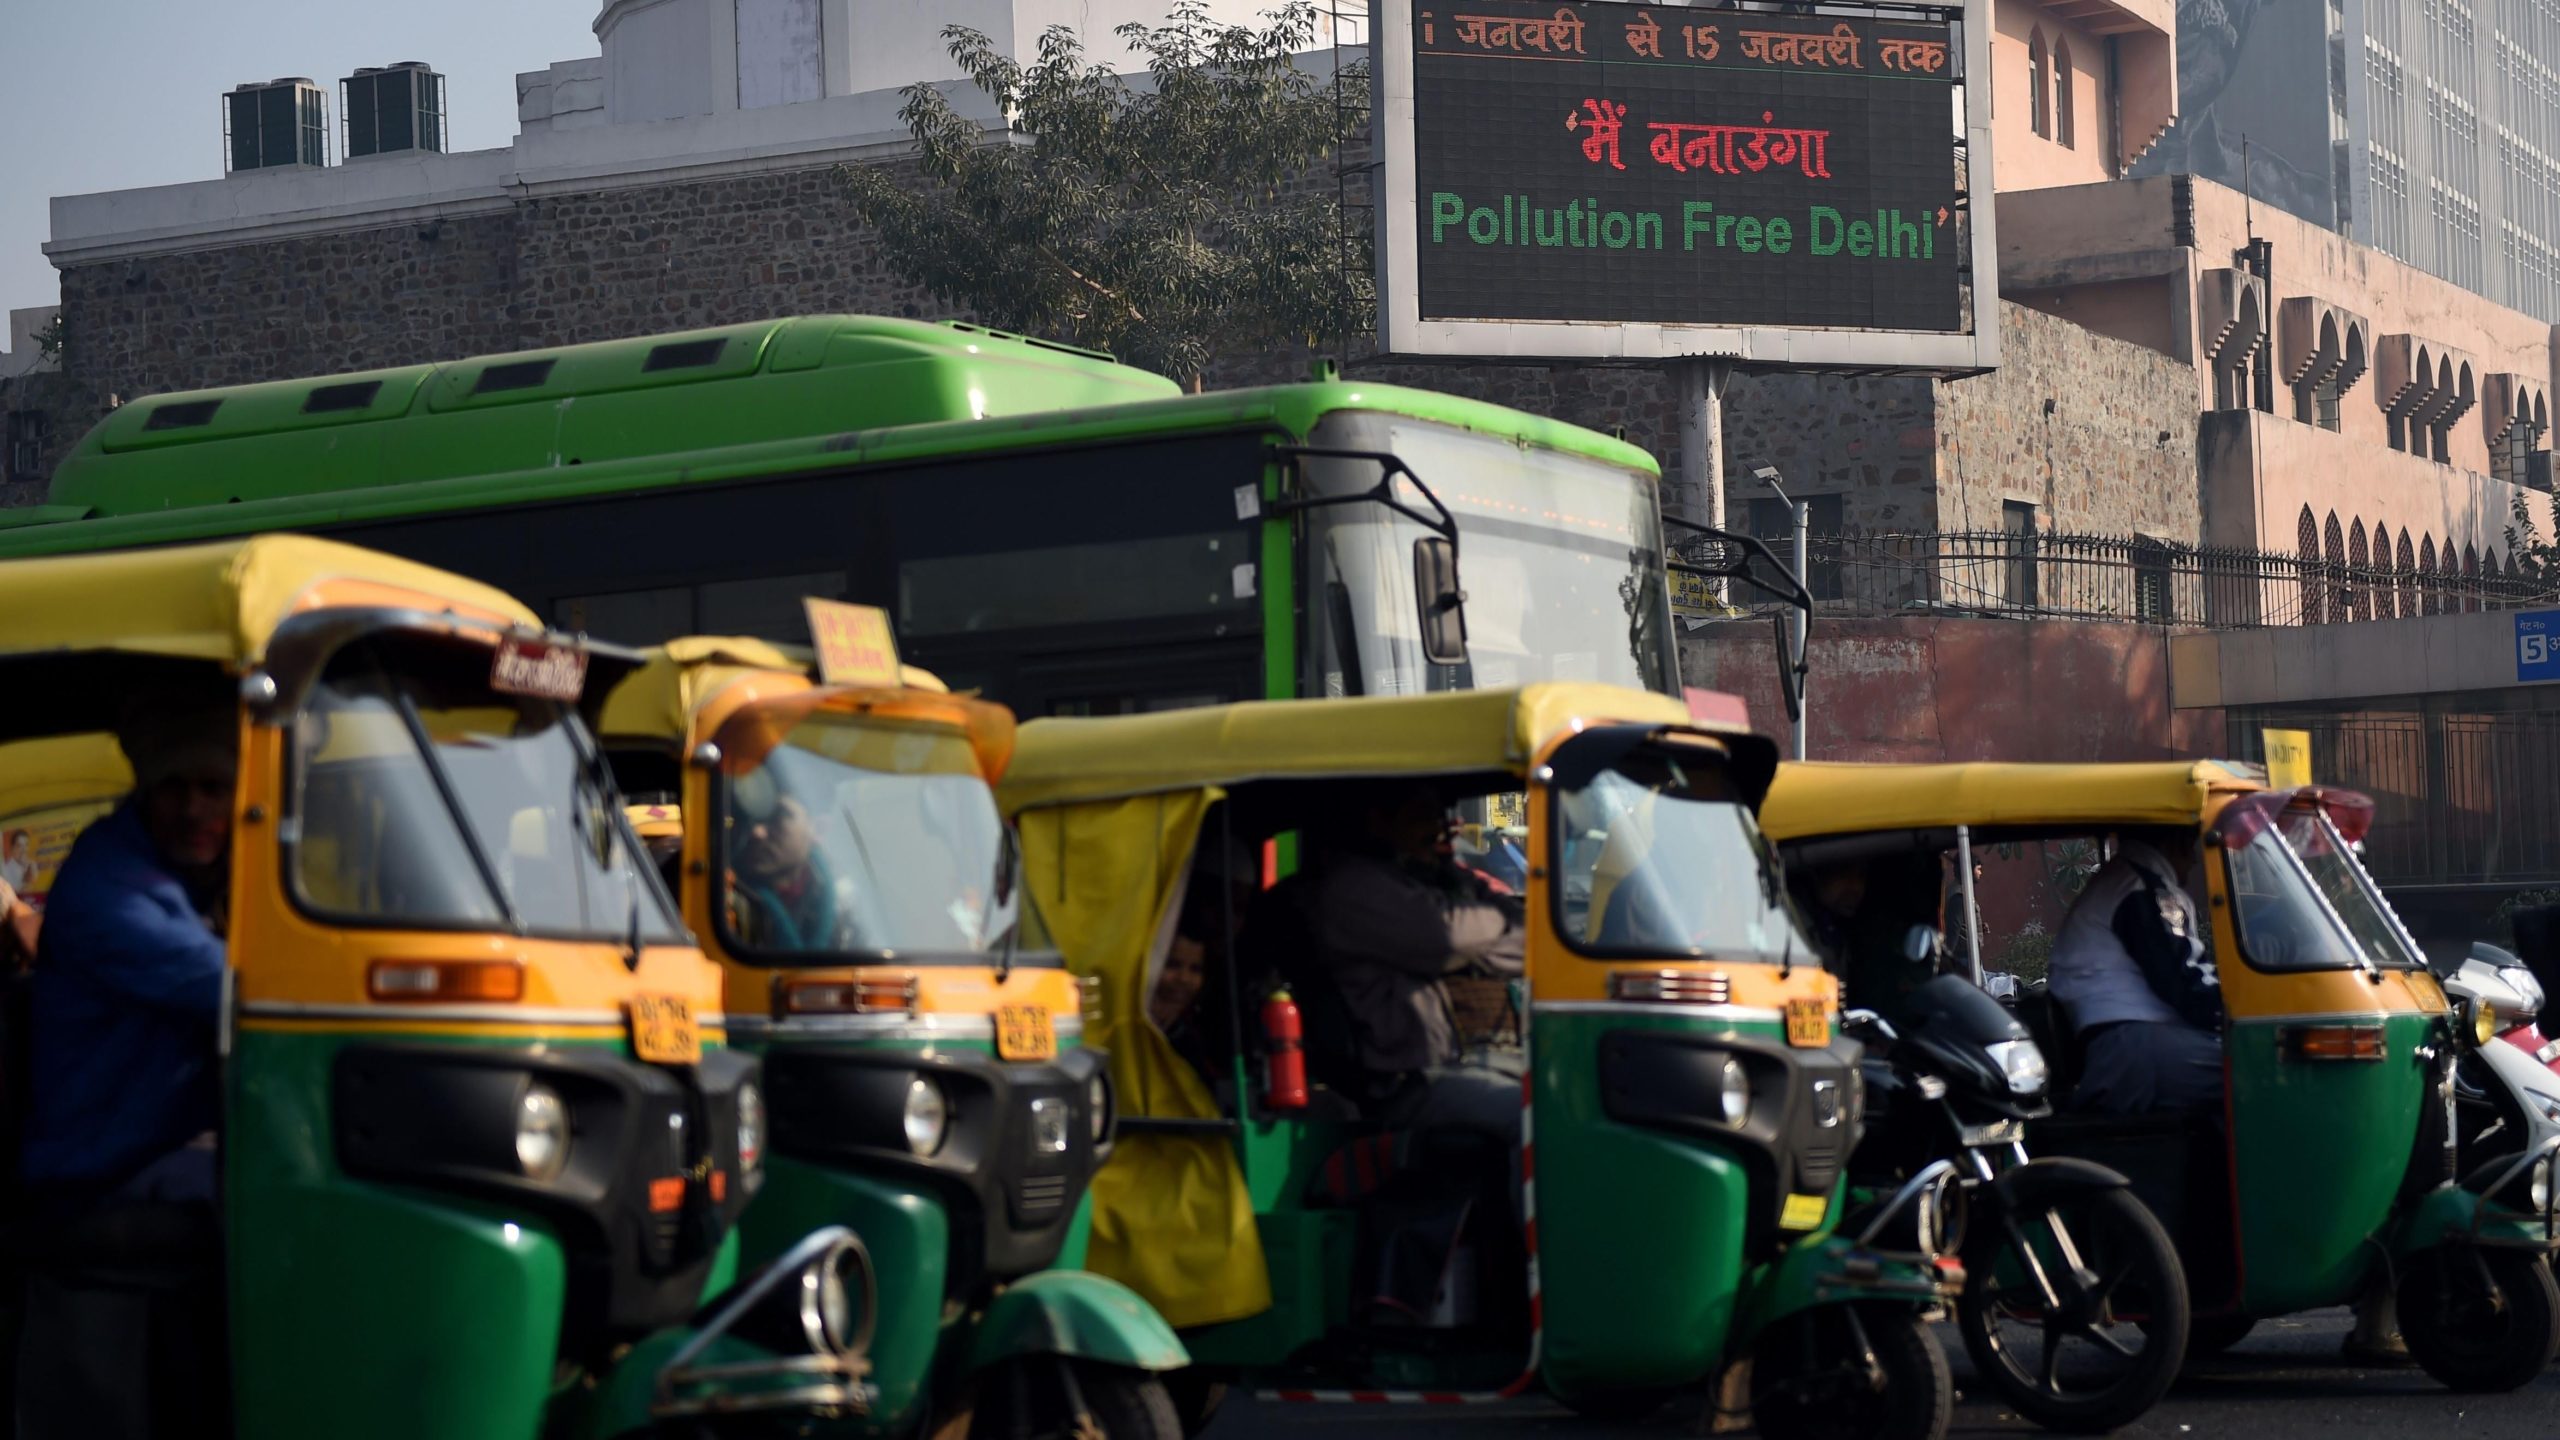 Honda Is Bringing Swappable Batteries And An Exchange Network To Rickshaws In India